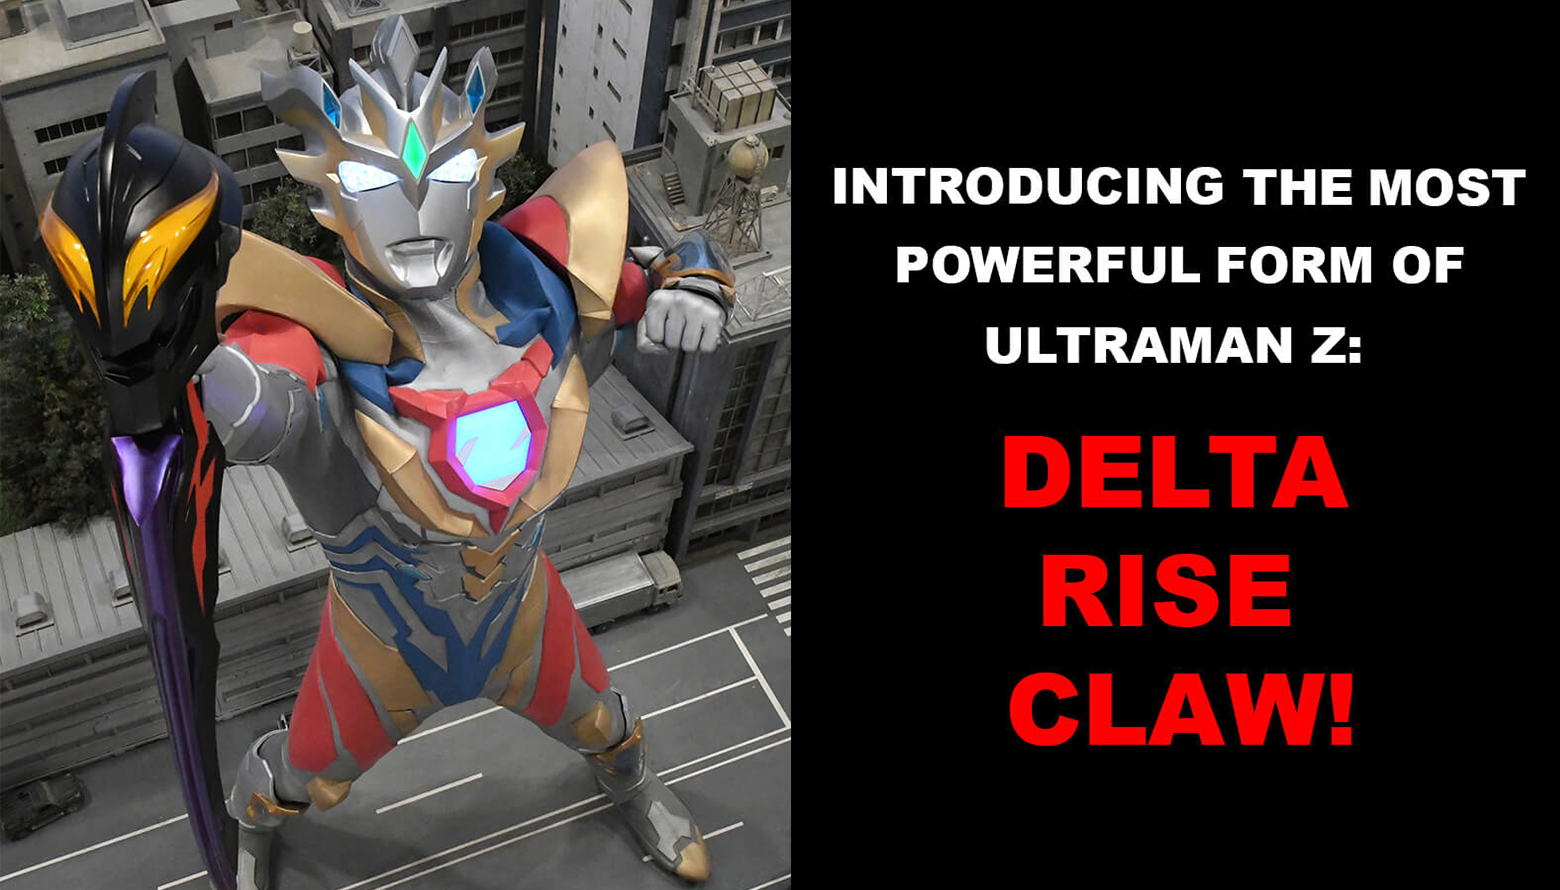 INTRODUCING THE MOST POWERFUL FORM OFULTRAMAN Z: DELTA RISE CLAW!